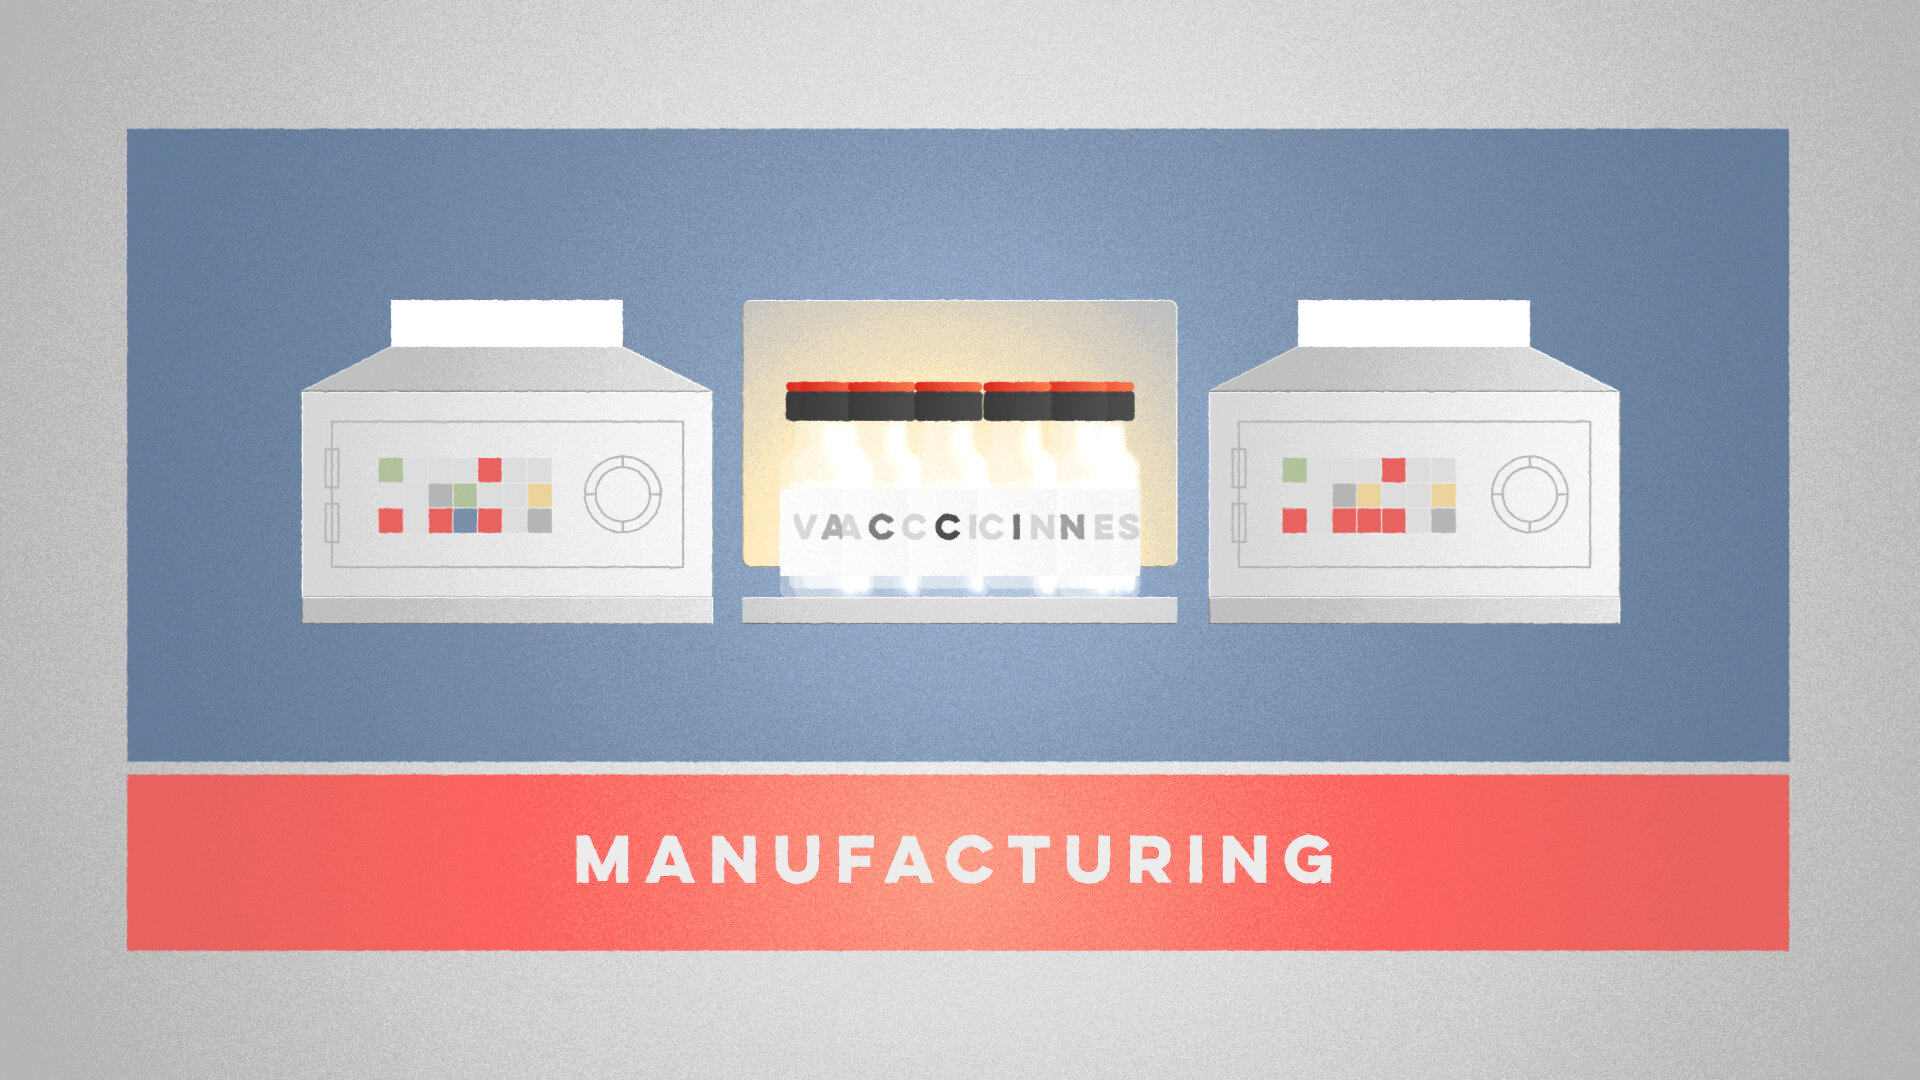 TED_Vaccines_06_ManufacturingOverview.jpg